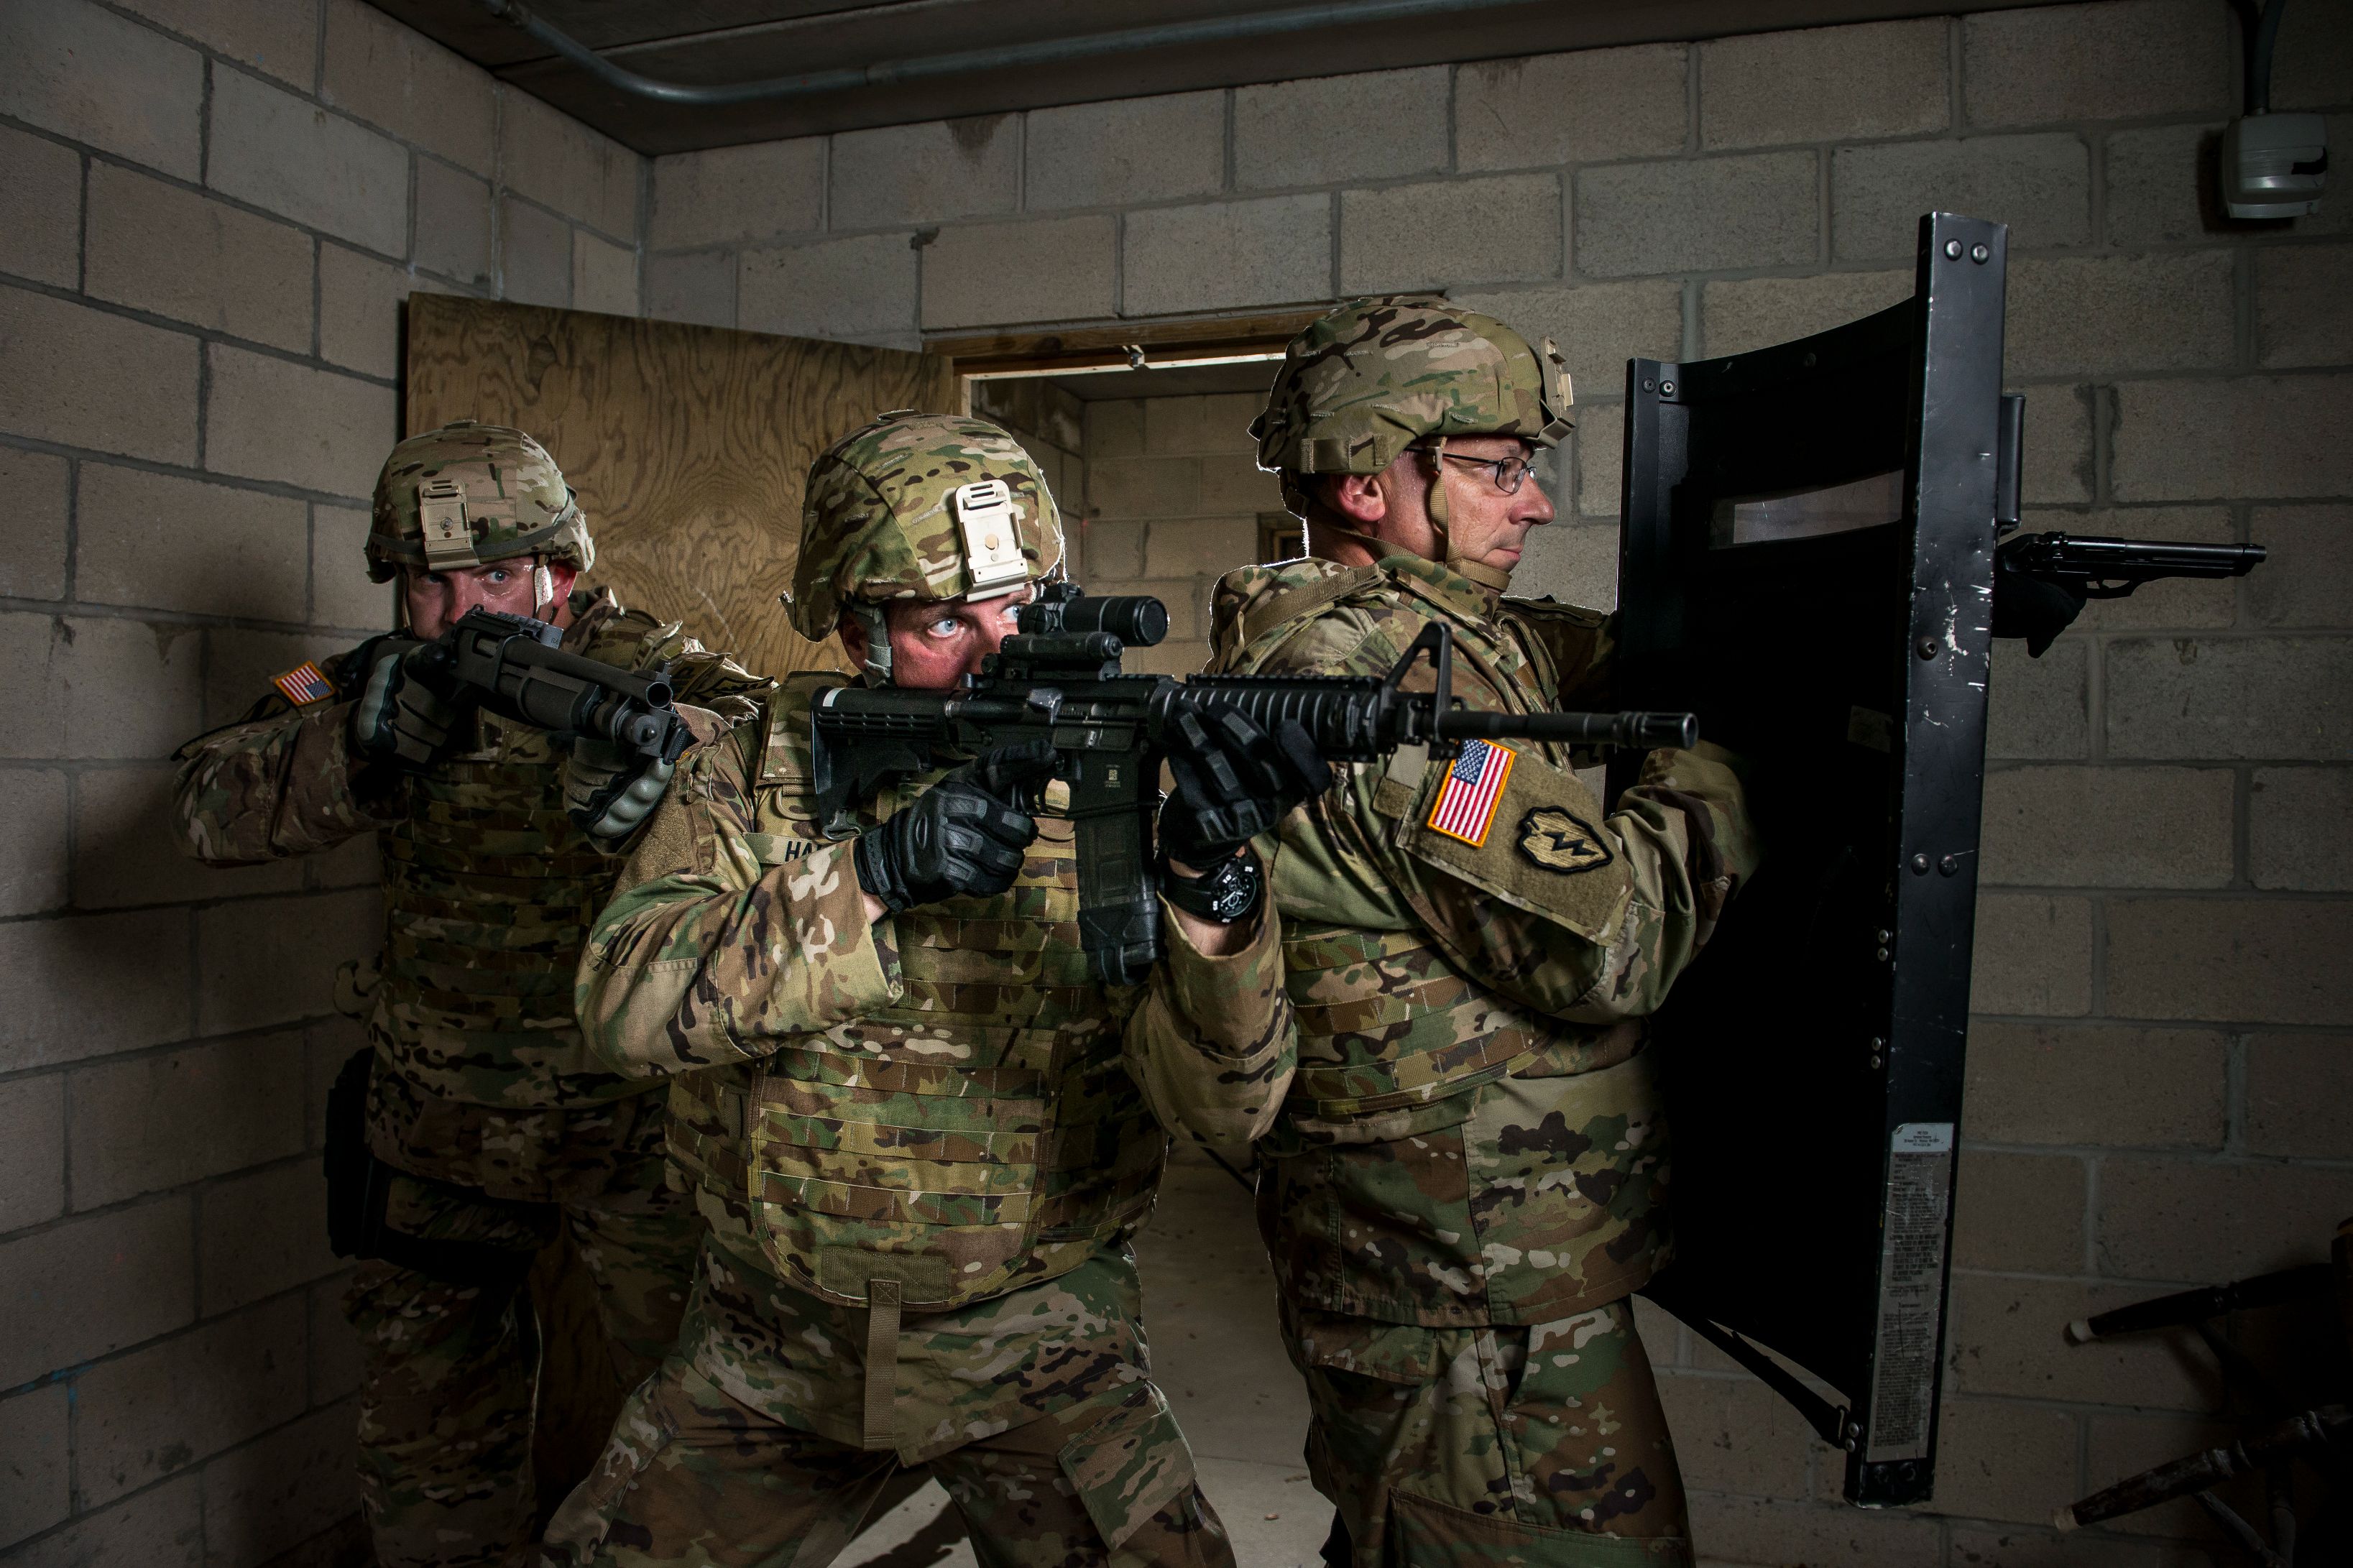 U.S. Army Reserve military police Soldiers from the 430th Military Police Detachment (Law Enforcement), located in Red Bank, New Jersey, run through a Military Operations on Urban Terrain (MOUT) drill during a photo shoot for Army Reserve recruiting at Joint Base McGuire-Dix-Lakehurst, New Jersey, July 25, 2017.